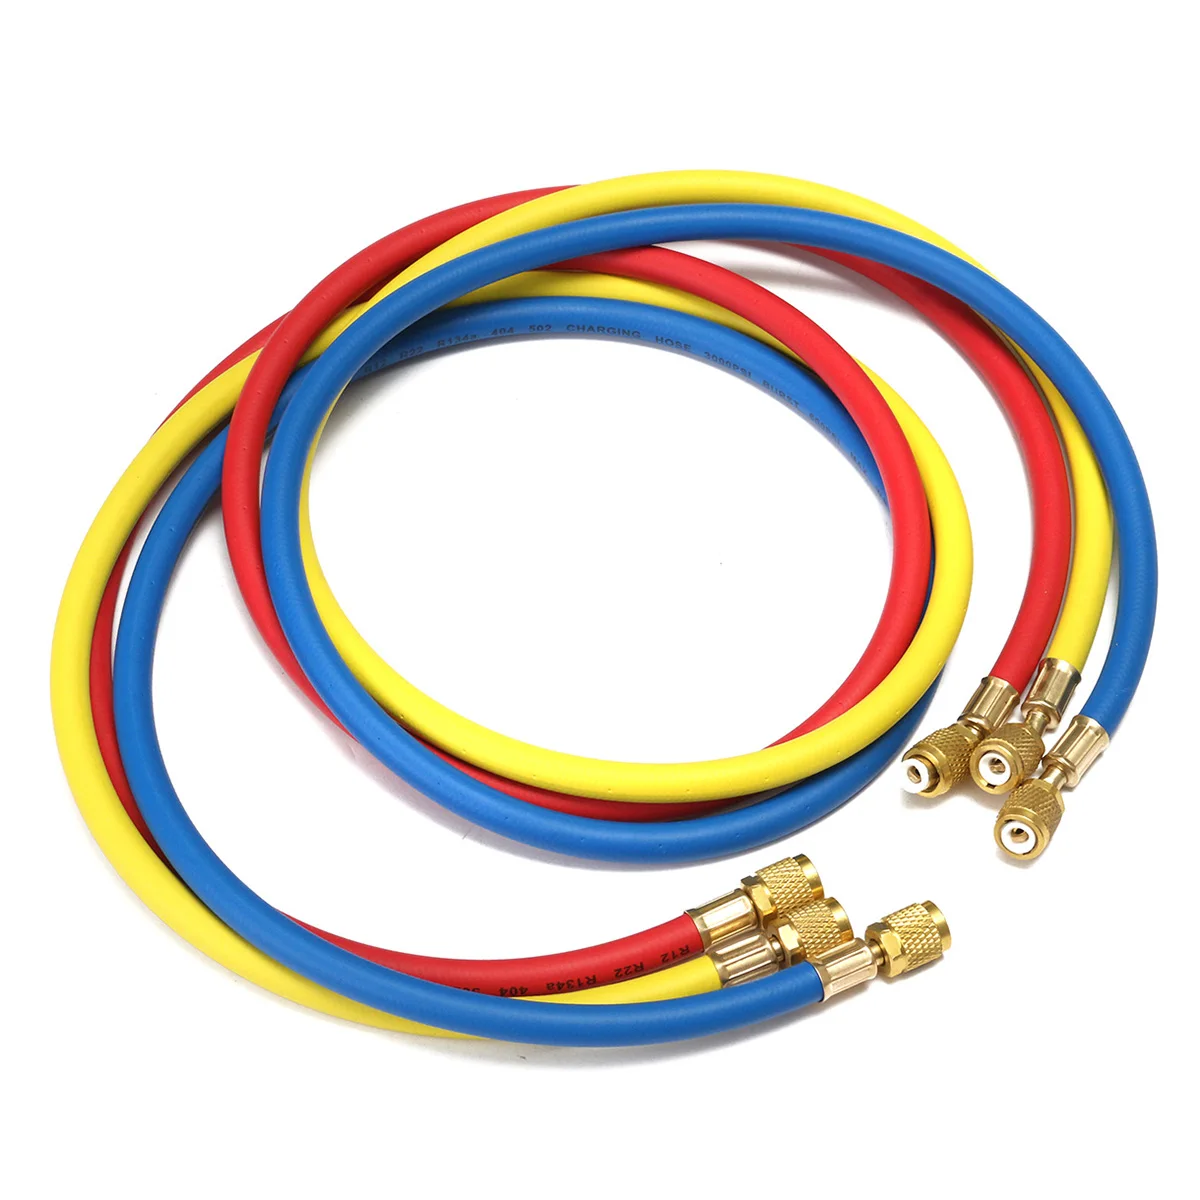 Refrigeration Charging Hoses R134a R22 R410a 1/4" SAE Female Manifold Gauge Set for Air Conditioner Red / Blue / Yellow